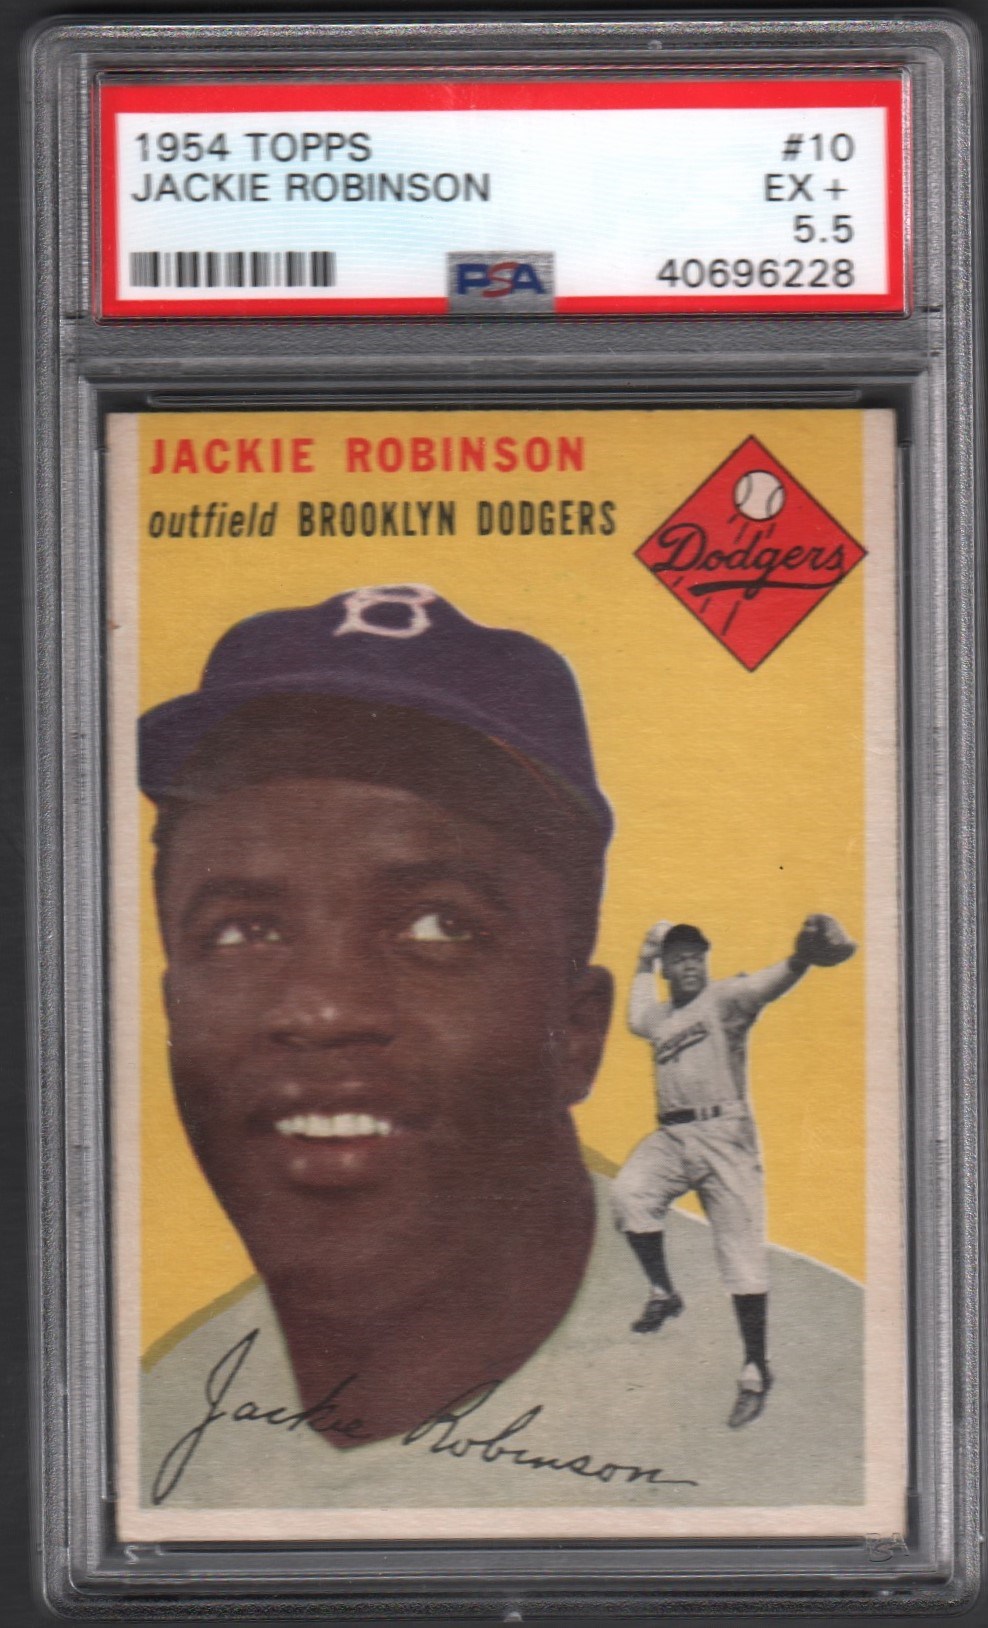 1954 and 1955 Topps Jackie Robinson PSA Graded Cards (2)